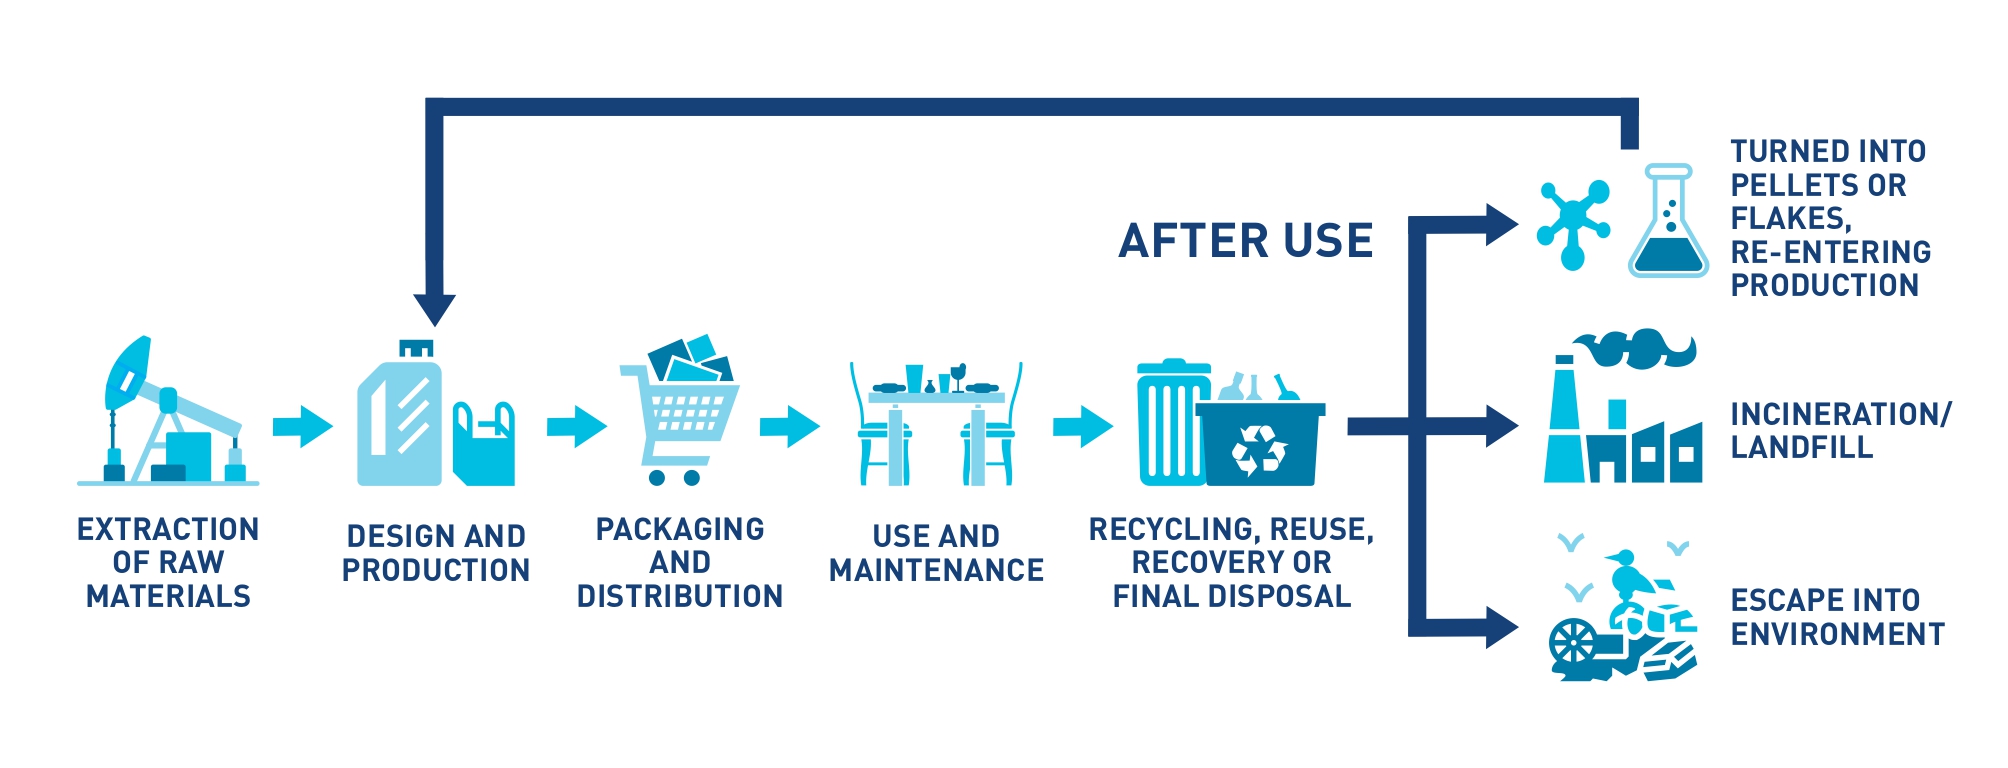 Plastic lifecycle after use graphic 